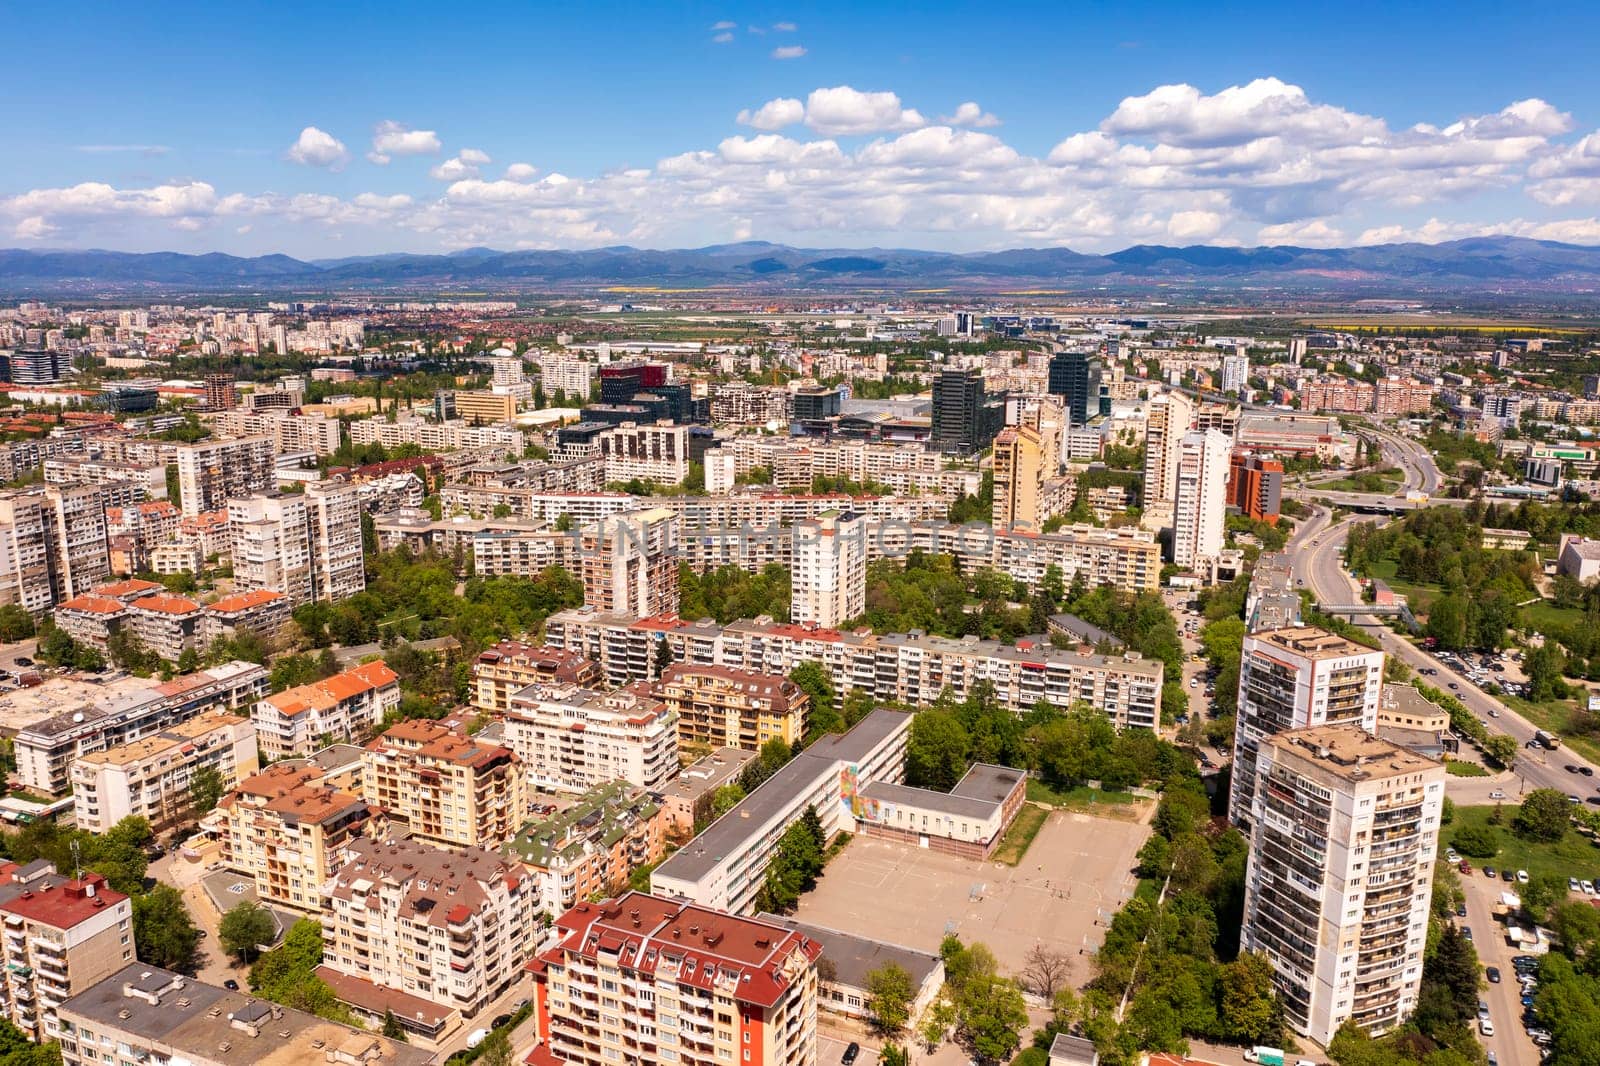 Aerial view from a drone of a district of the city next to the mountain, Sofia Bulgaria by EdVal